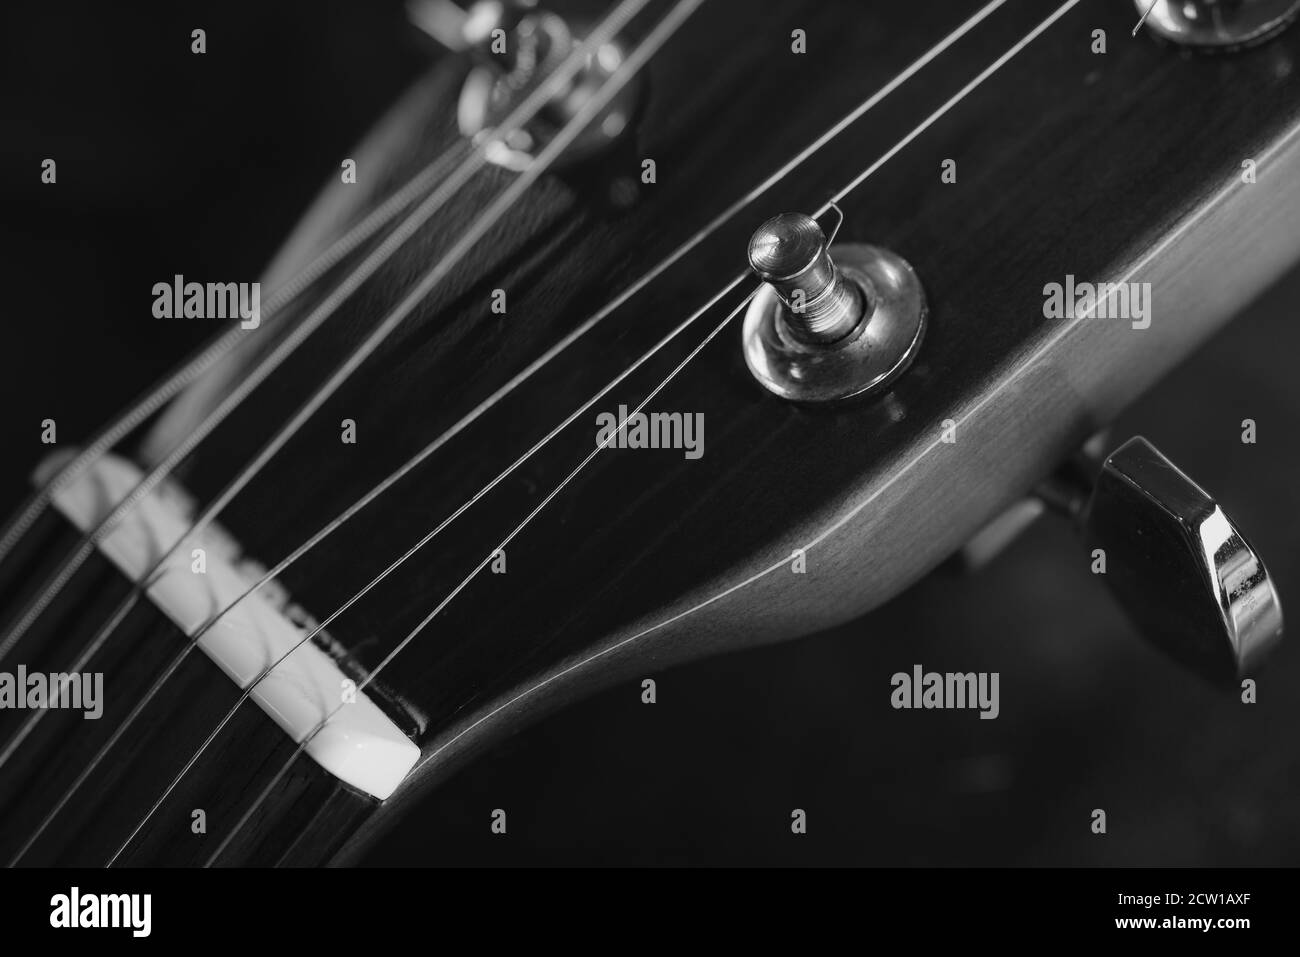 Tuning mechanics of a guitar in detail, detailed photo of tuning screws of  a guitar, guitar strings, guitar neck, guitar head in detail Stock Photo -  Alamy